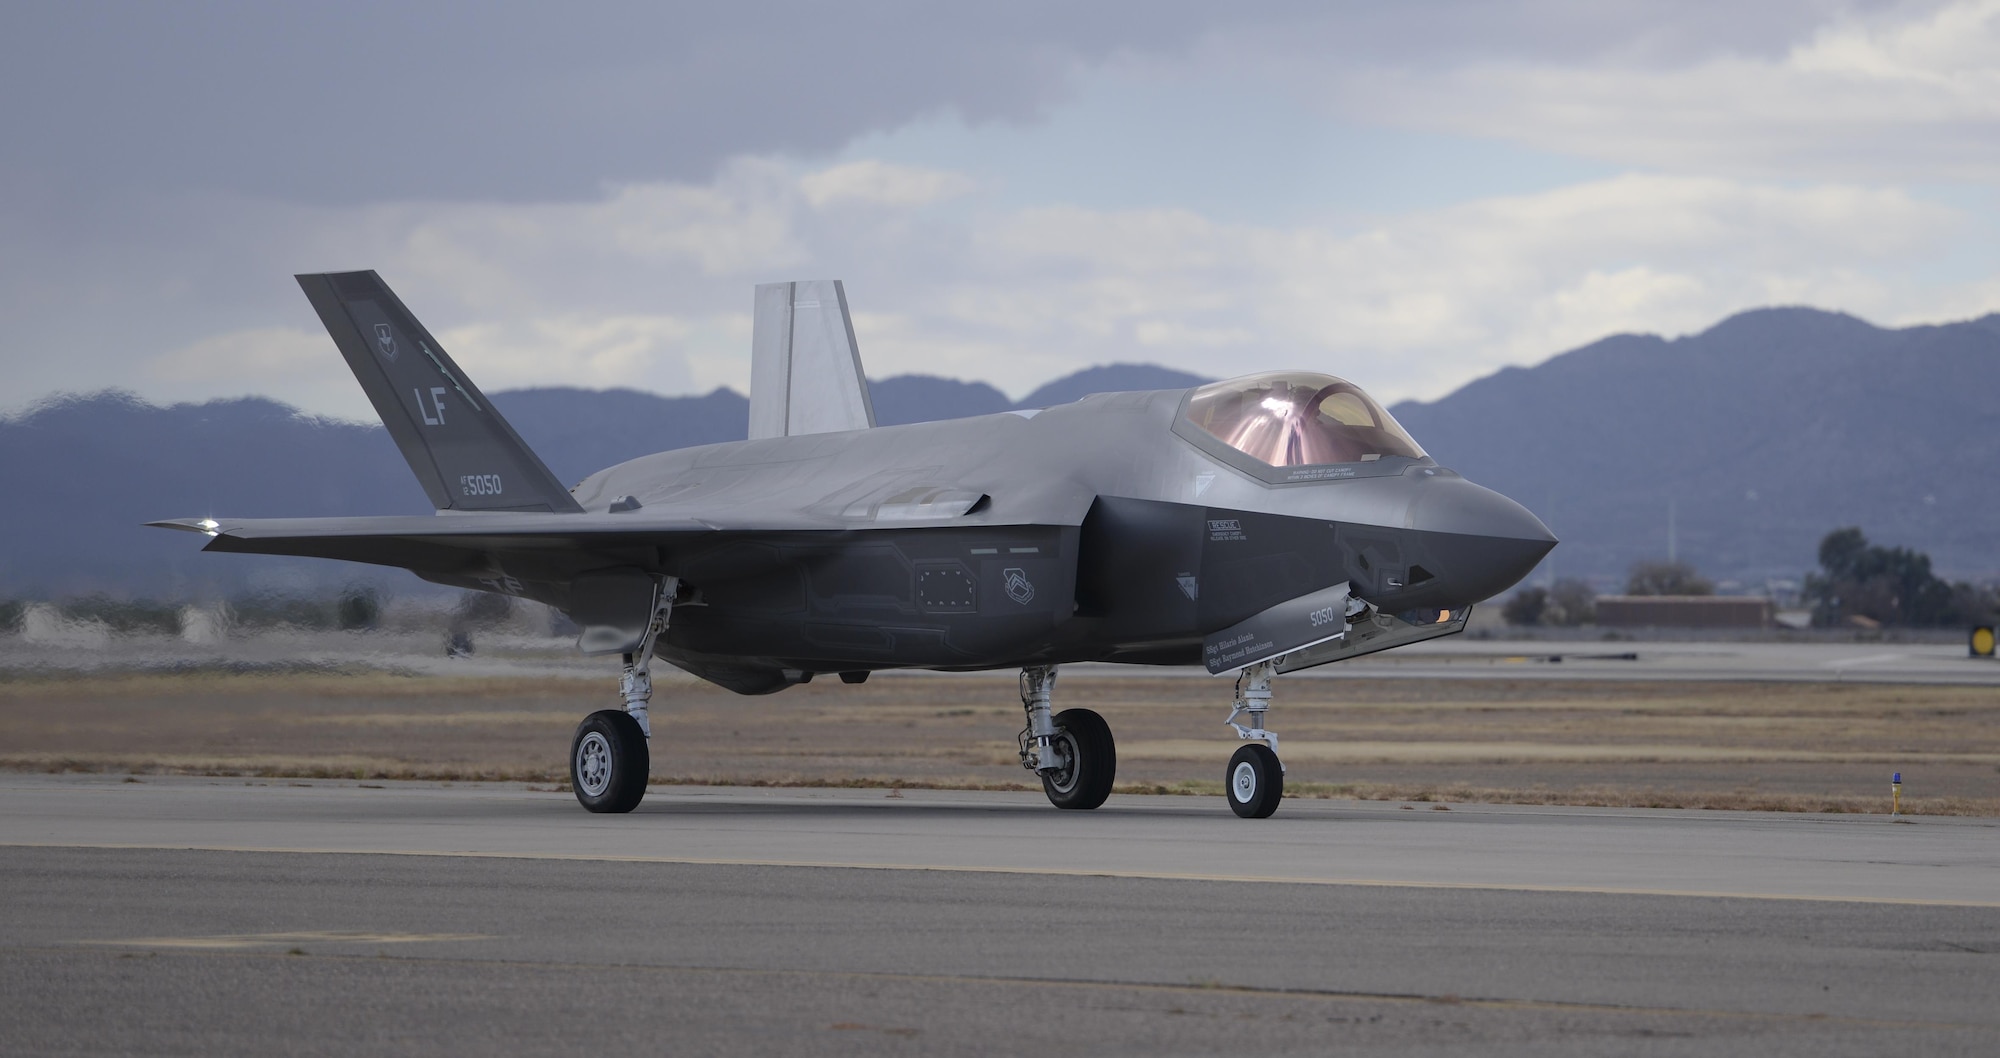 An F-35A Lightning II taxies from the runway onto the flightline after successfully completing a sortie Dec. 14, 2015, at Luke Air Force Base, Ariz. The F-35 is being adopted internationally by eight partner nations, including Norway, Italy and Australia. (U.S. Air Force photo/Airman 1st Class Ridge Shan)